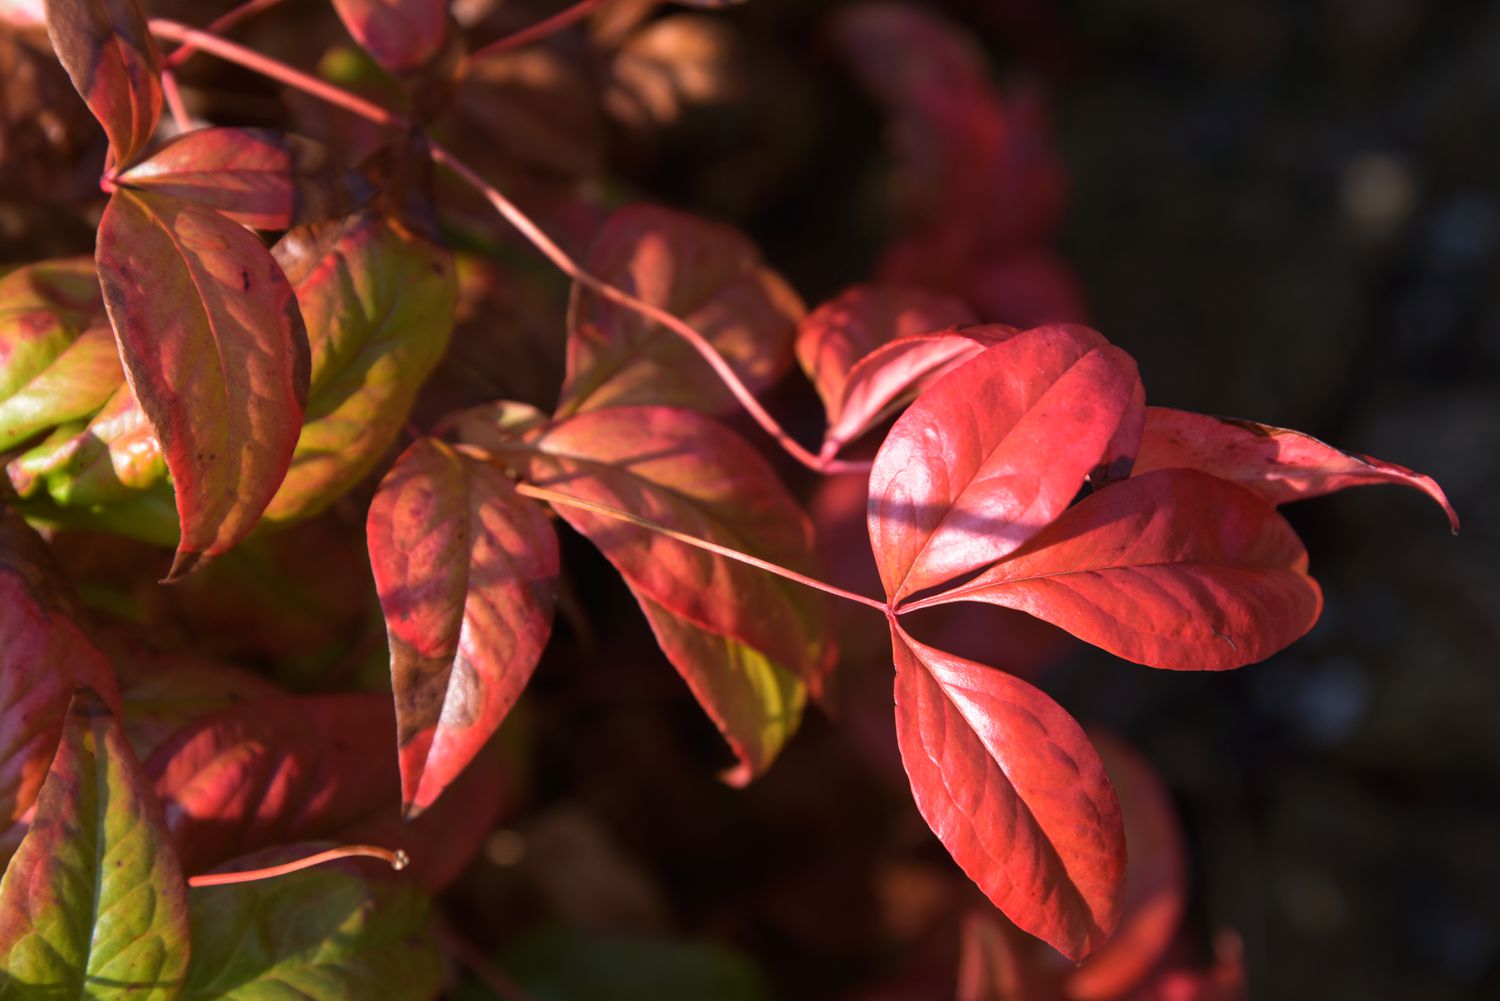 Firepower nandina with red leaves in sunlight closeup